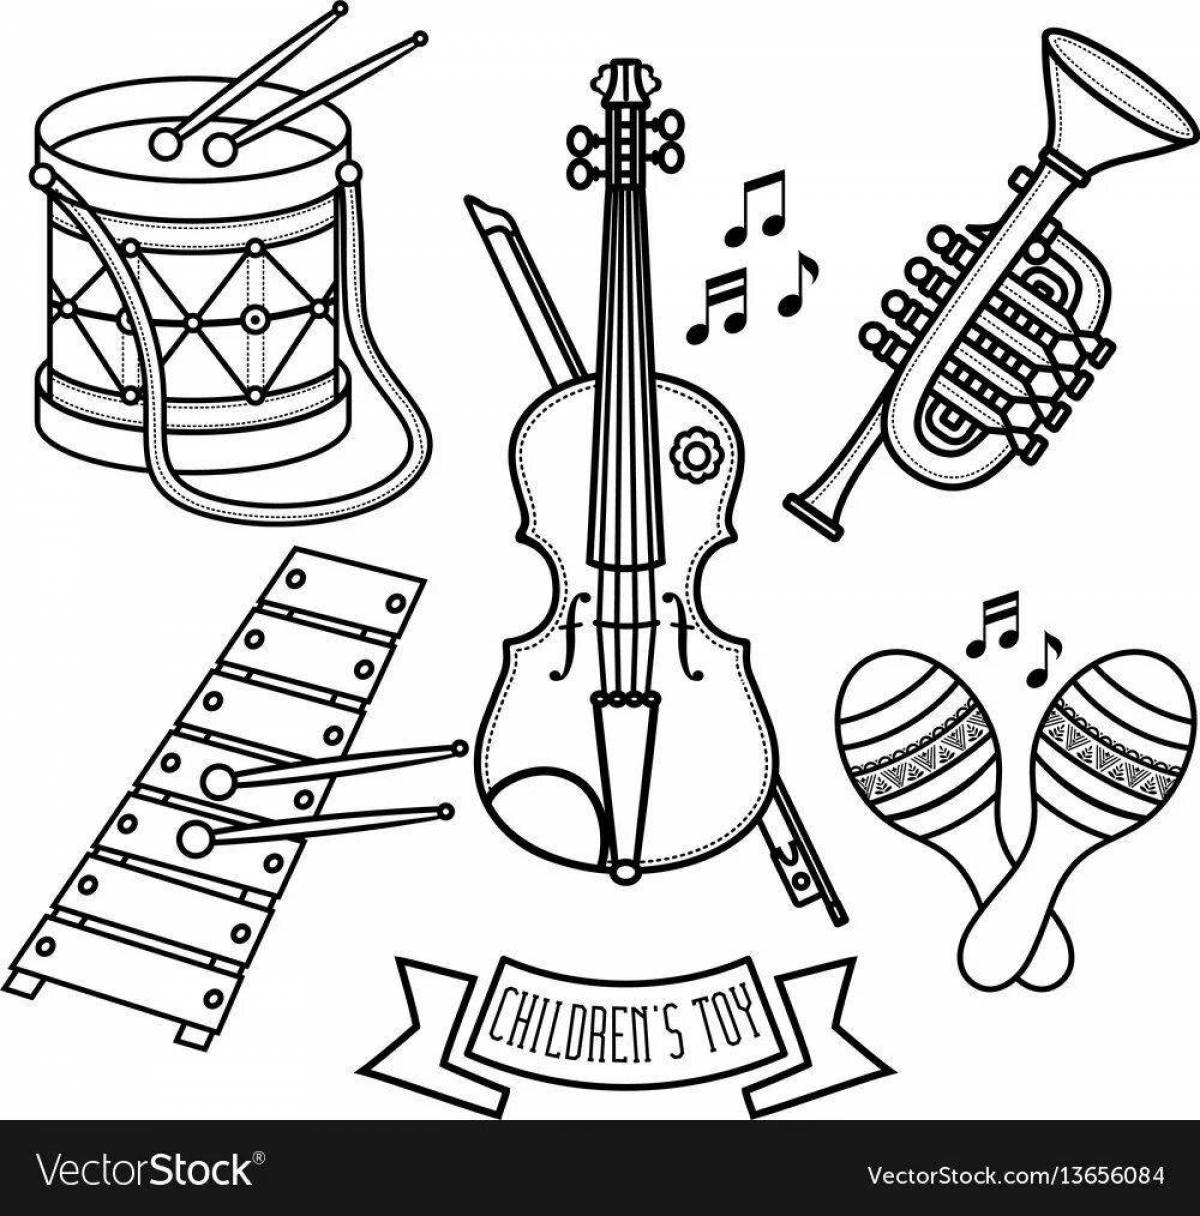 A fun musical instrument coloring book for preschoolers